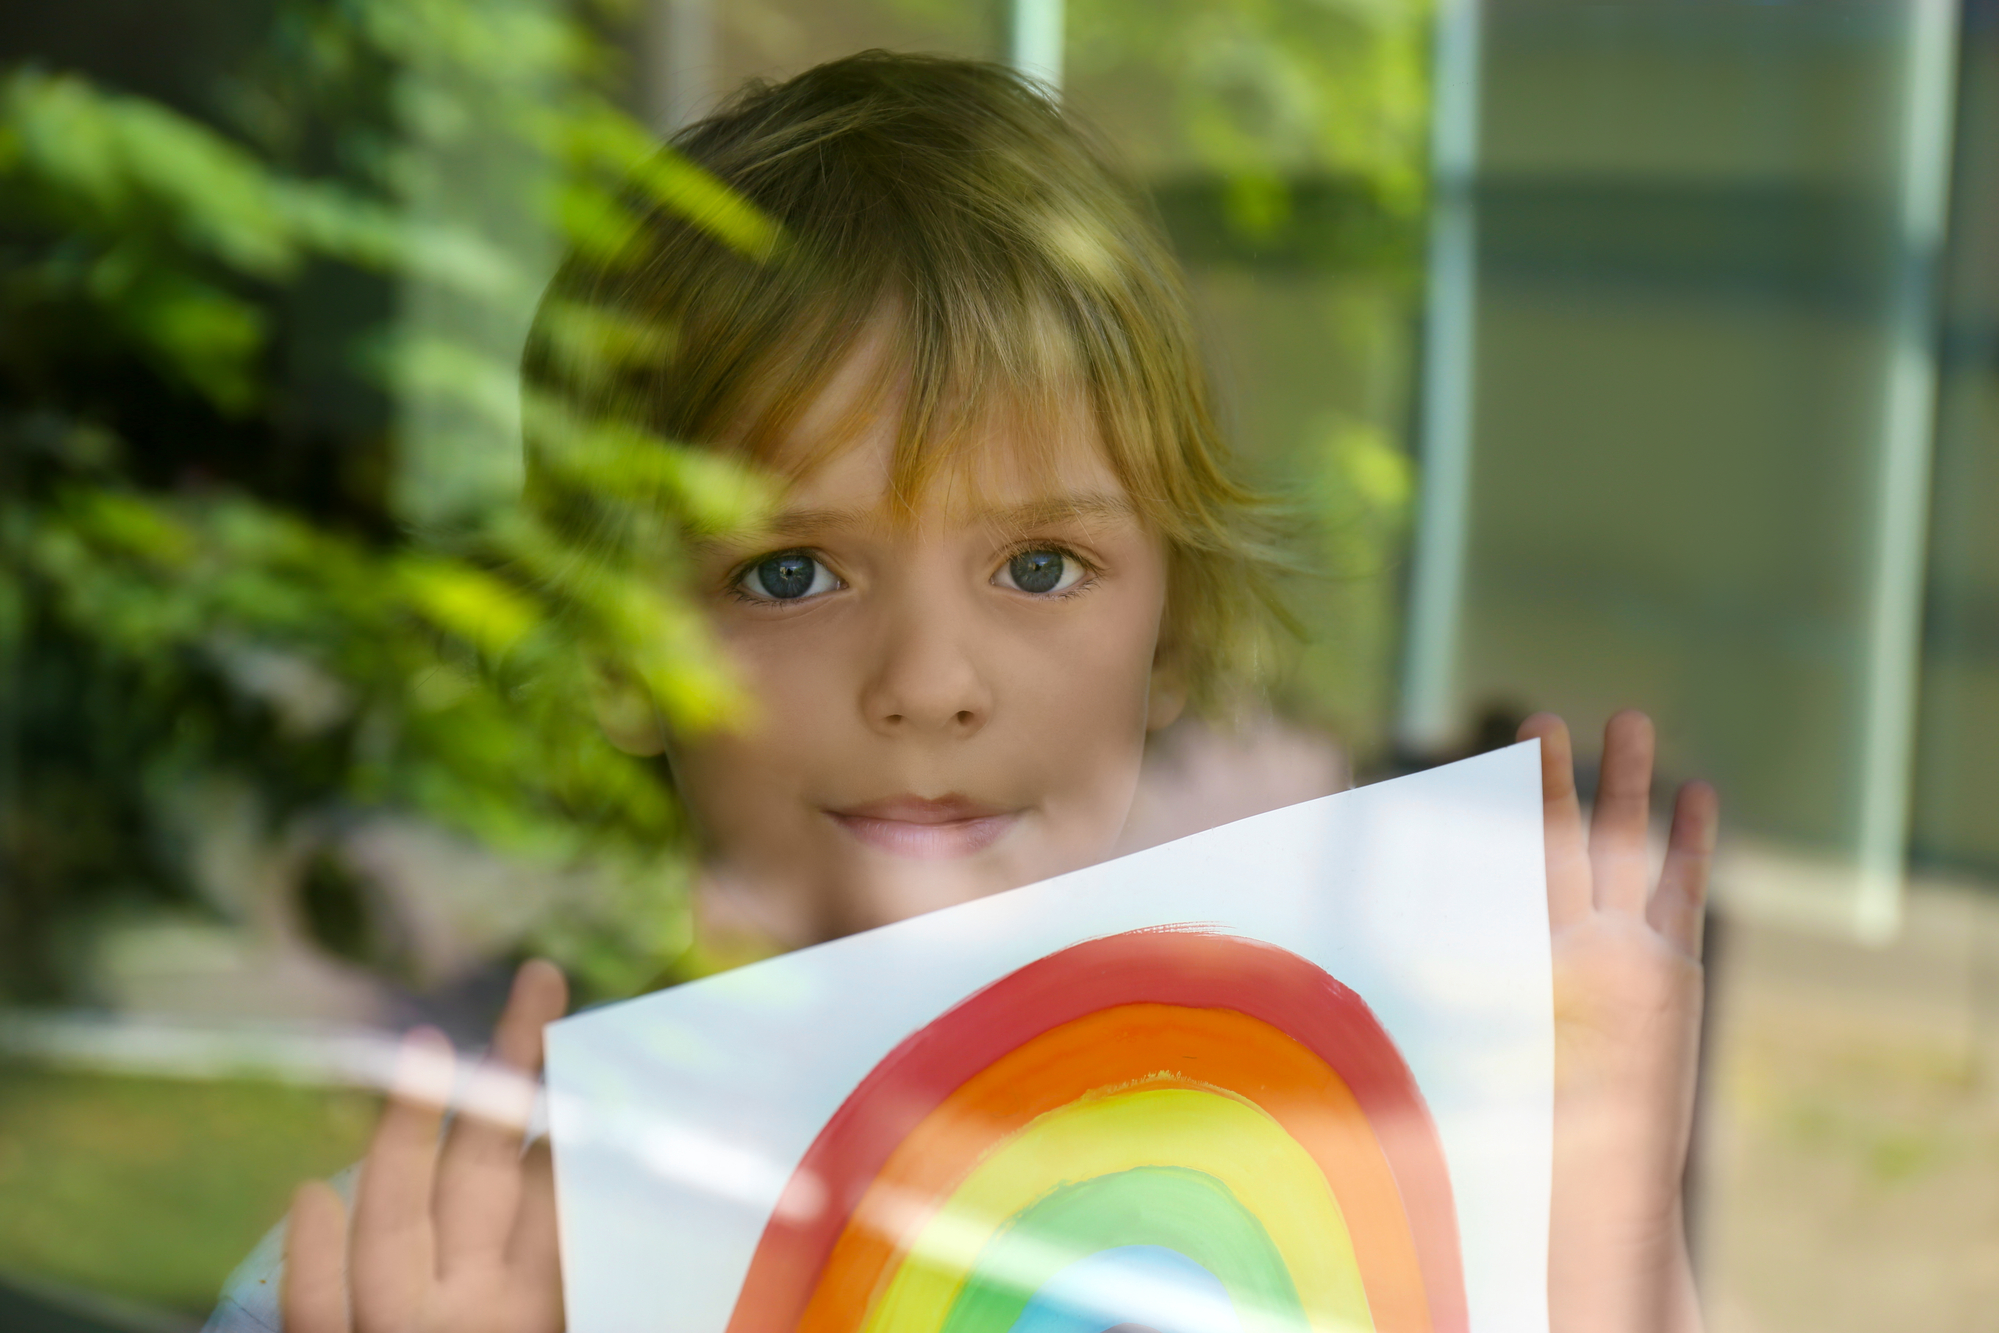 Little boy with picture of rainbow near window - portrait photography ideas